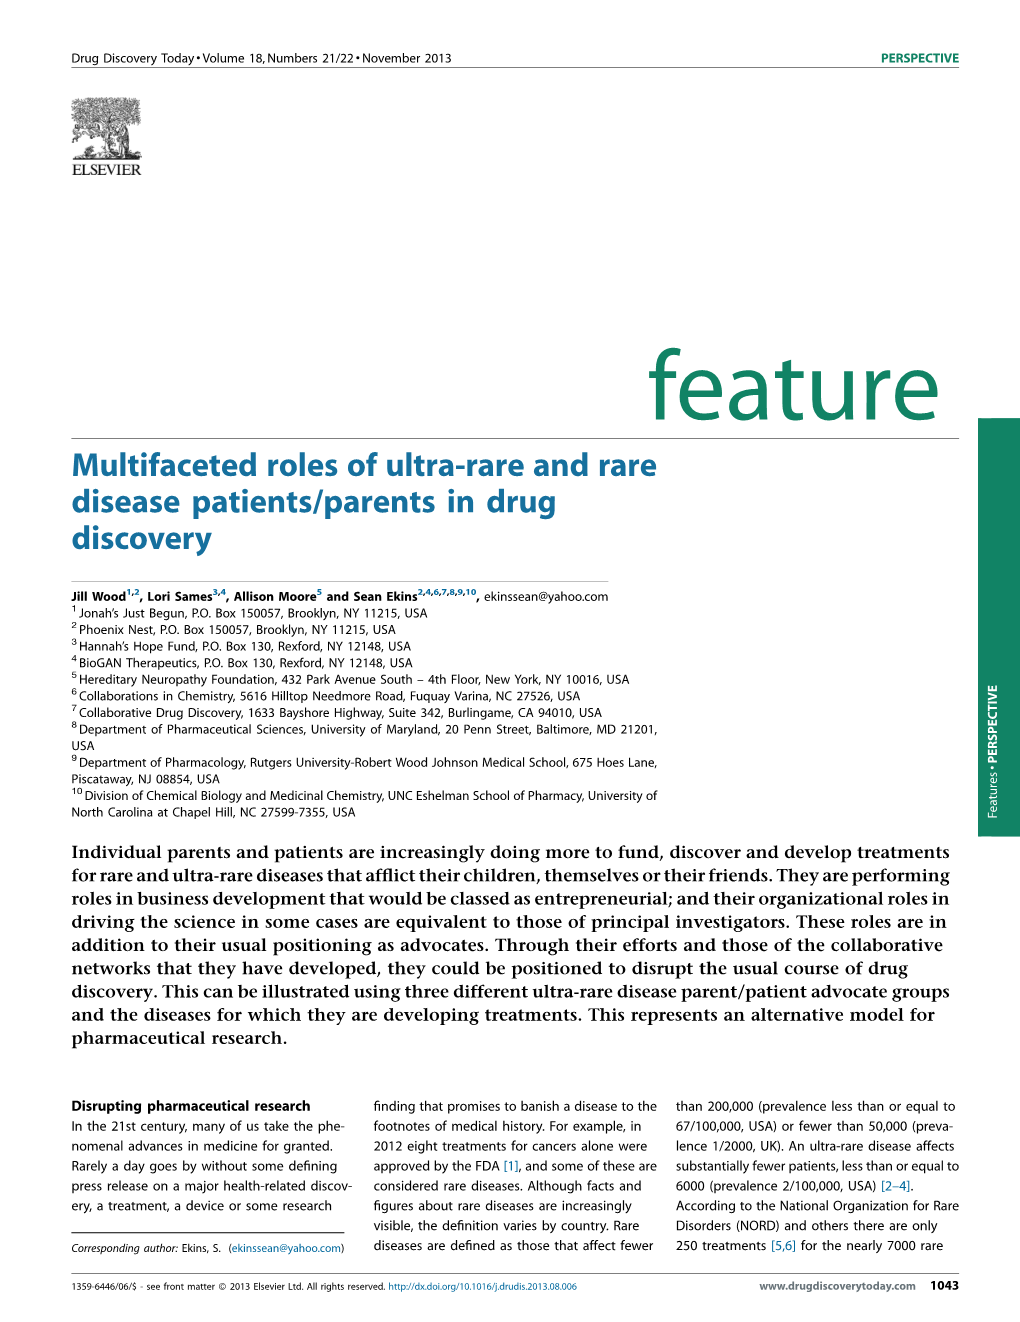 Multifaceted Roles of Ultra-Rare and Rare Disease Patients/Parents In